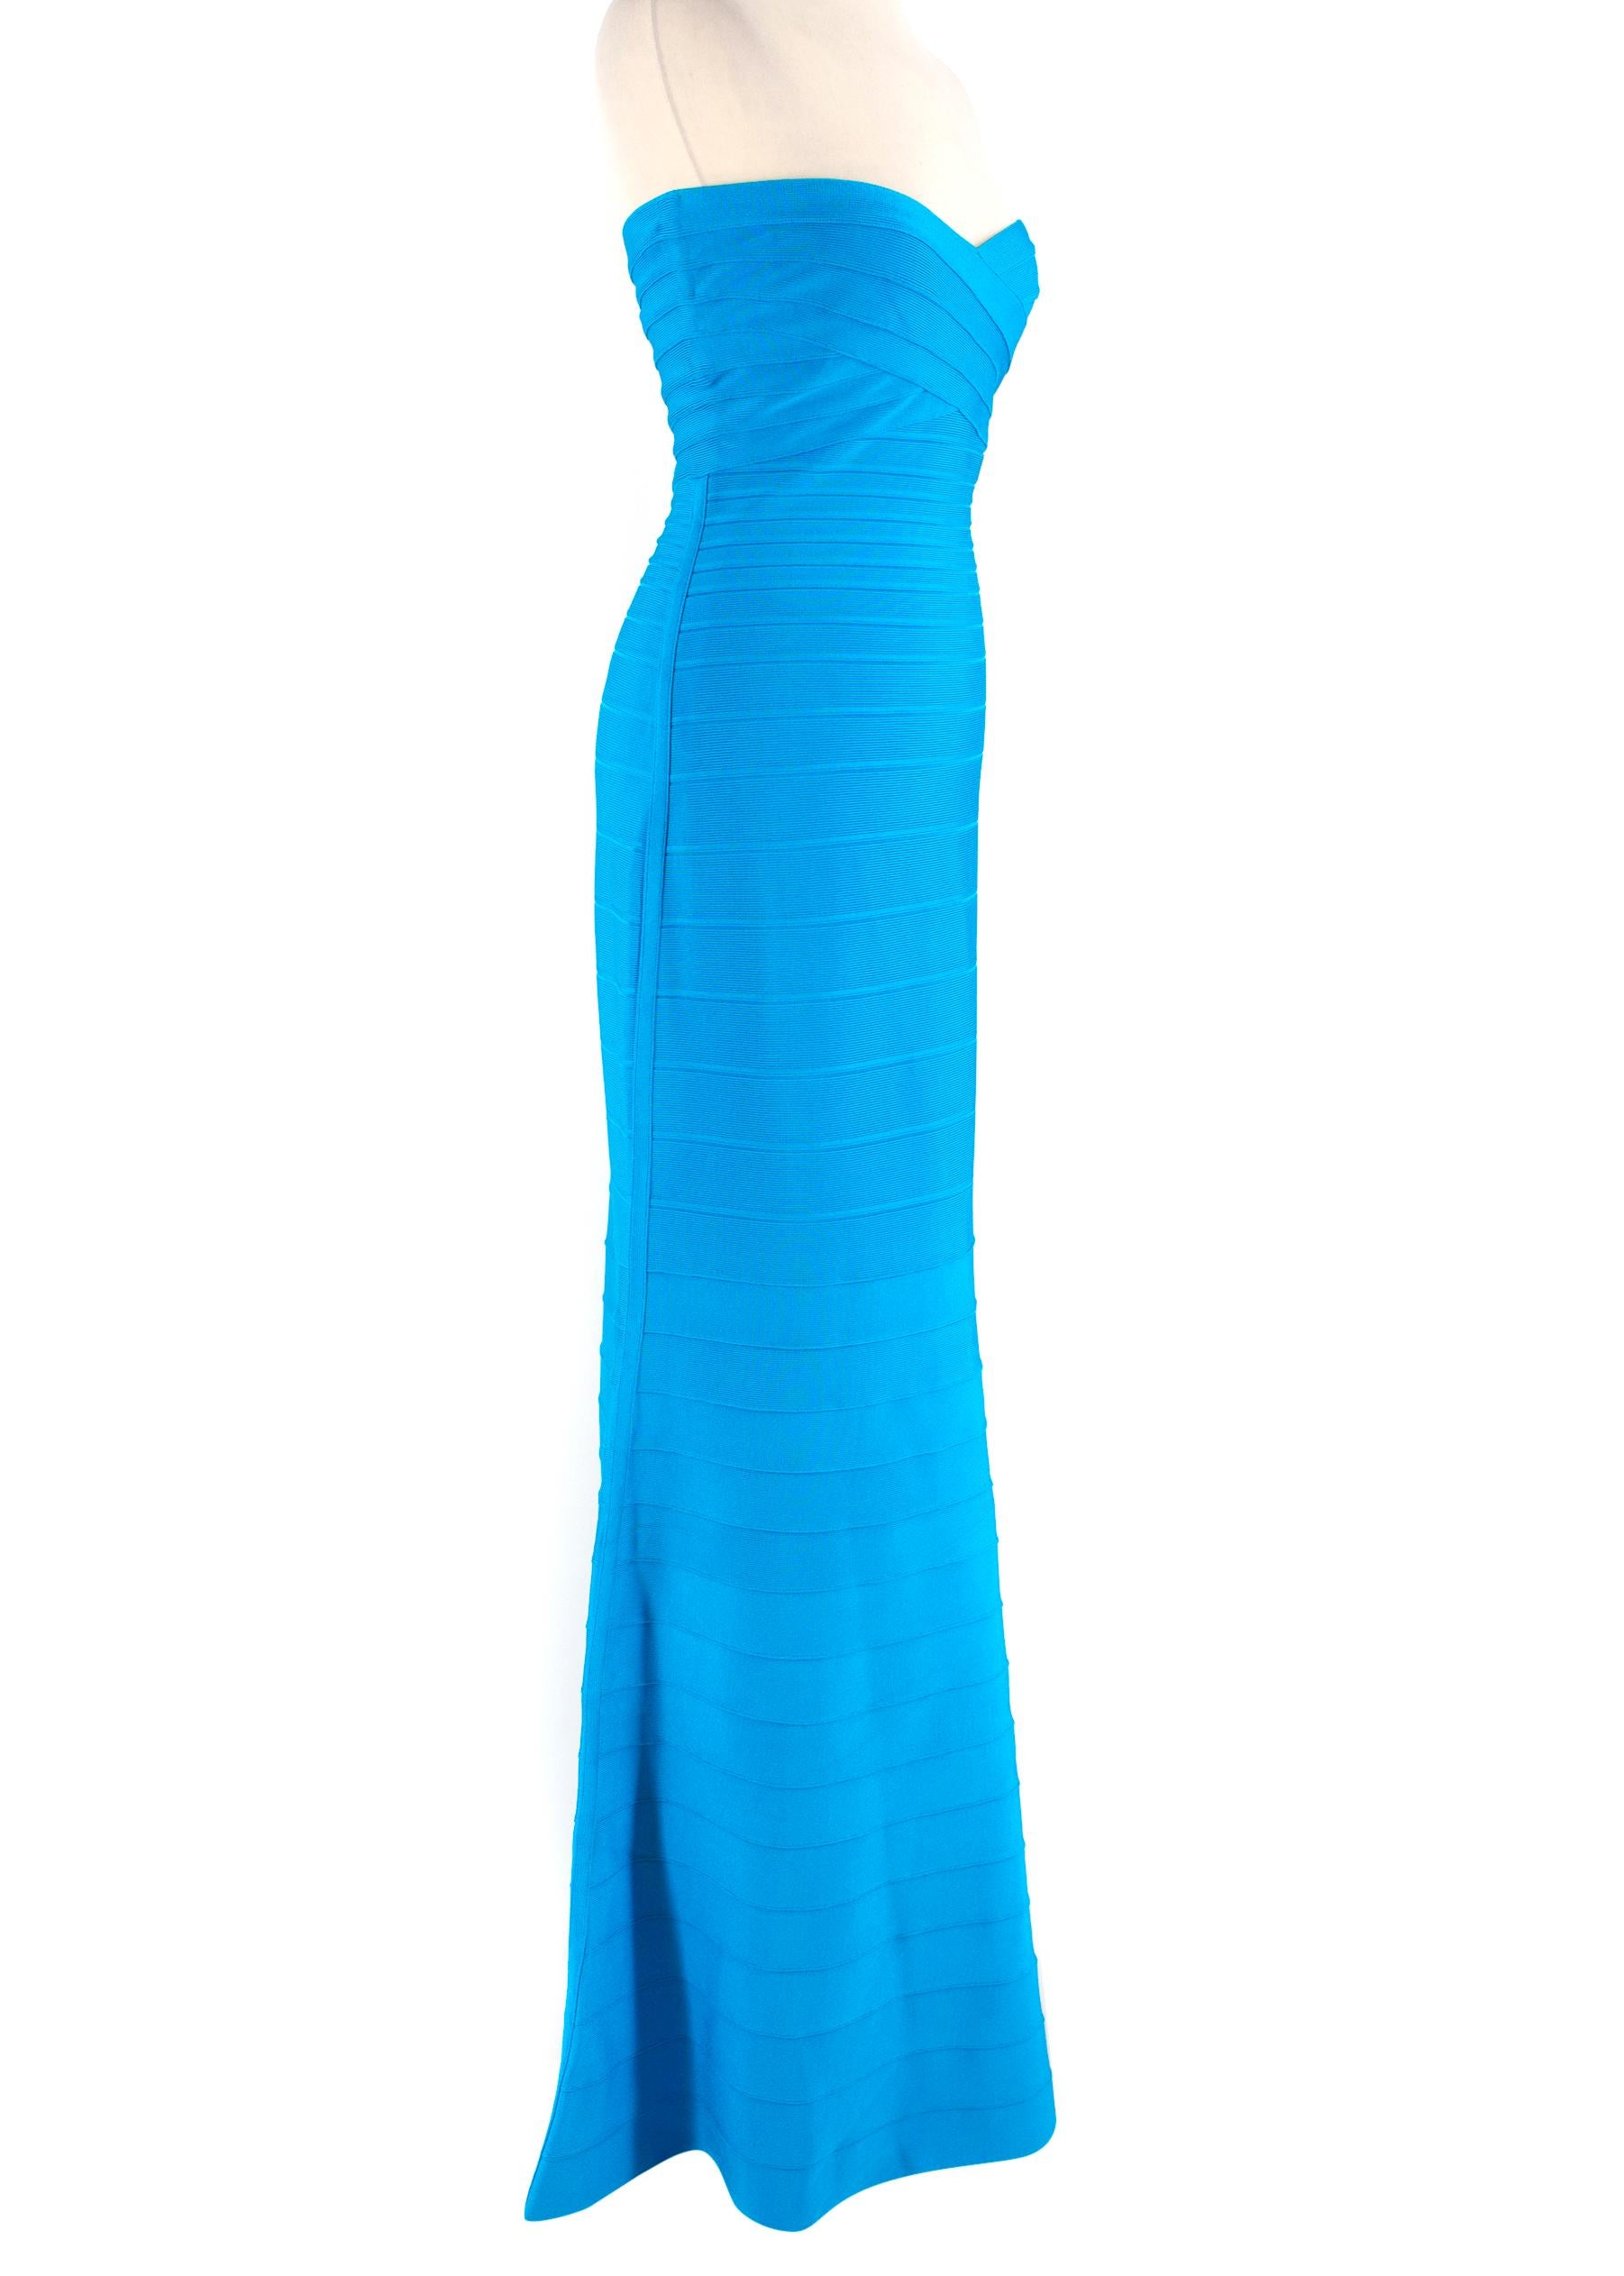 Herve Leger Sara turquoise bandage gown

- Turquoise-blue, heavyweight double knit 
- Bandage design 
- Strapless, internal boning and hook-fastening back strap 
- Centre-back concealed-zip fastening 
- Top internal silicone tape

Please note, these